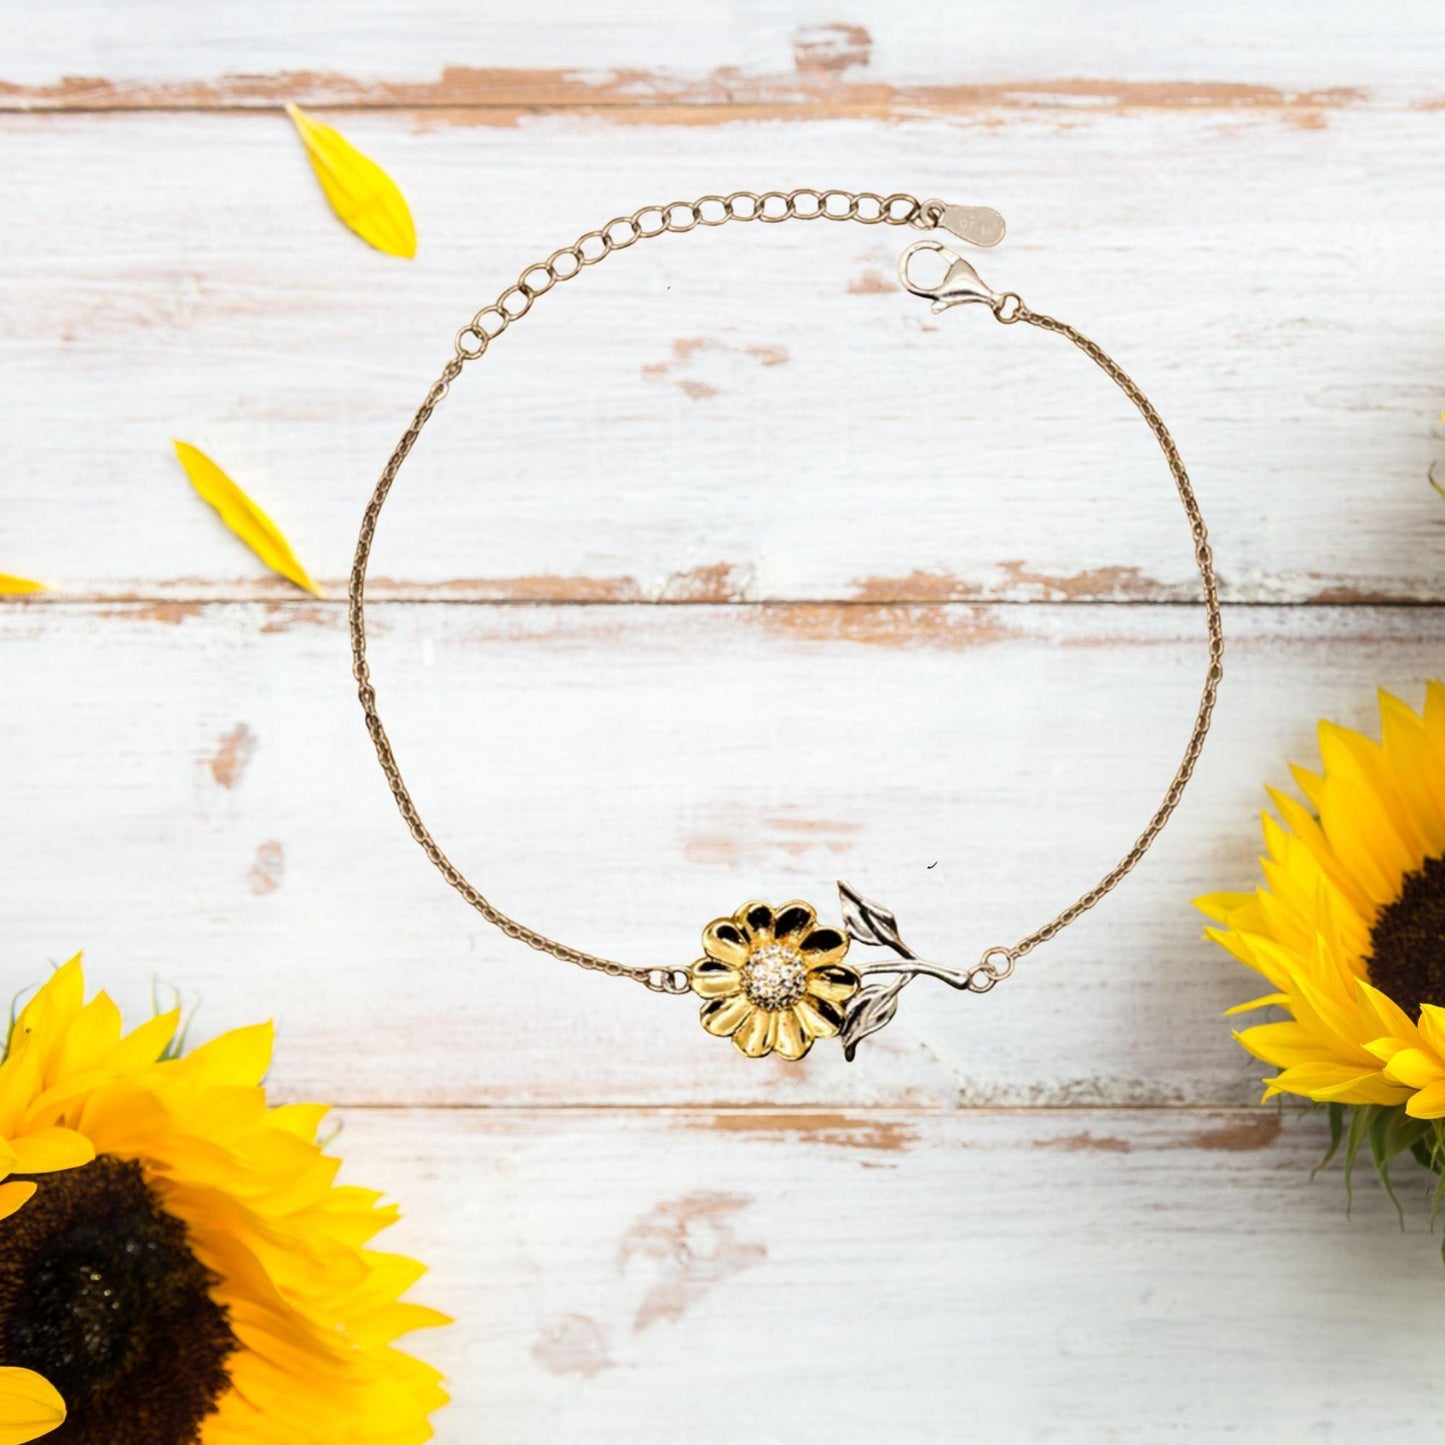 Childcare Worker Sunflower Bracelet - Thanks for being who you are - Birthday Christmas Jewelry Gifts Coworkers Colleague Boss - Mallard Moon Gift Shop